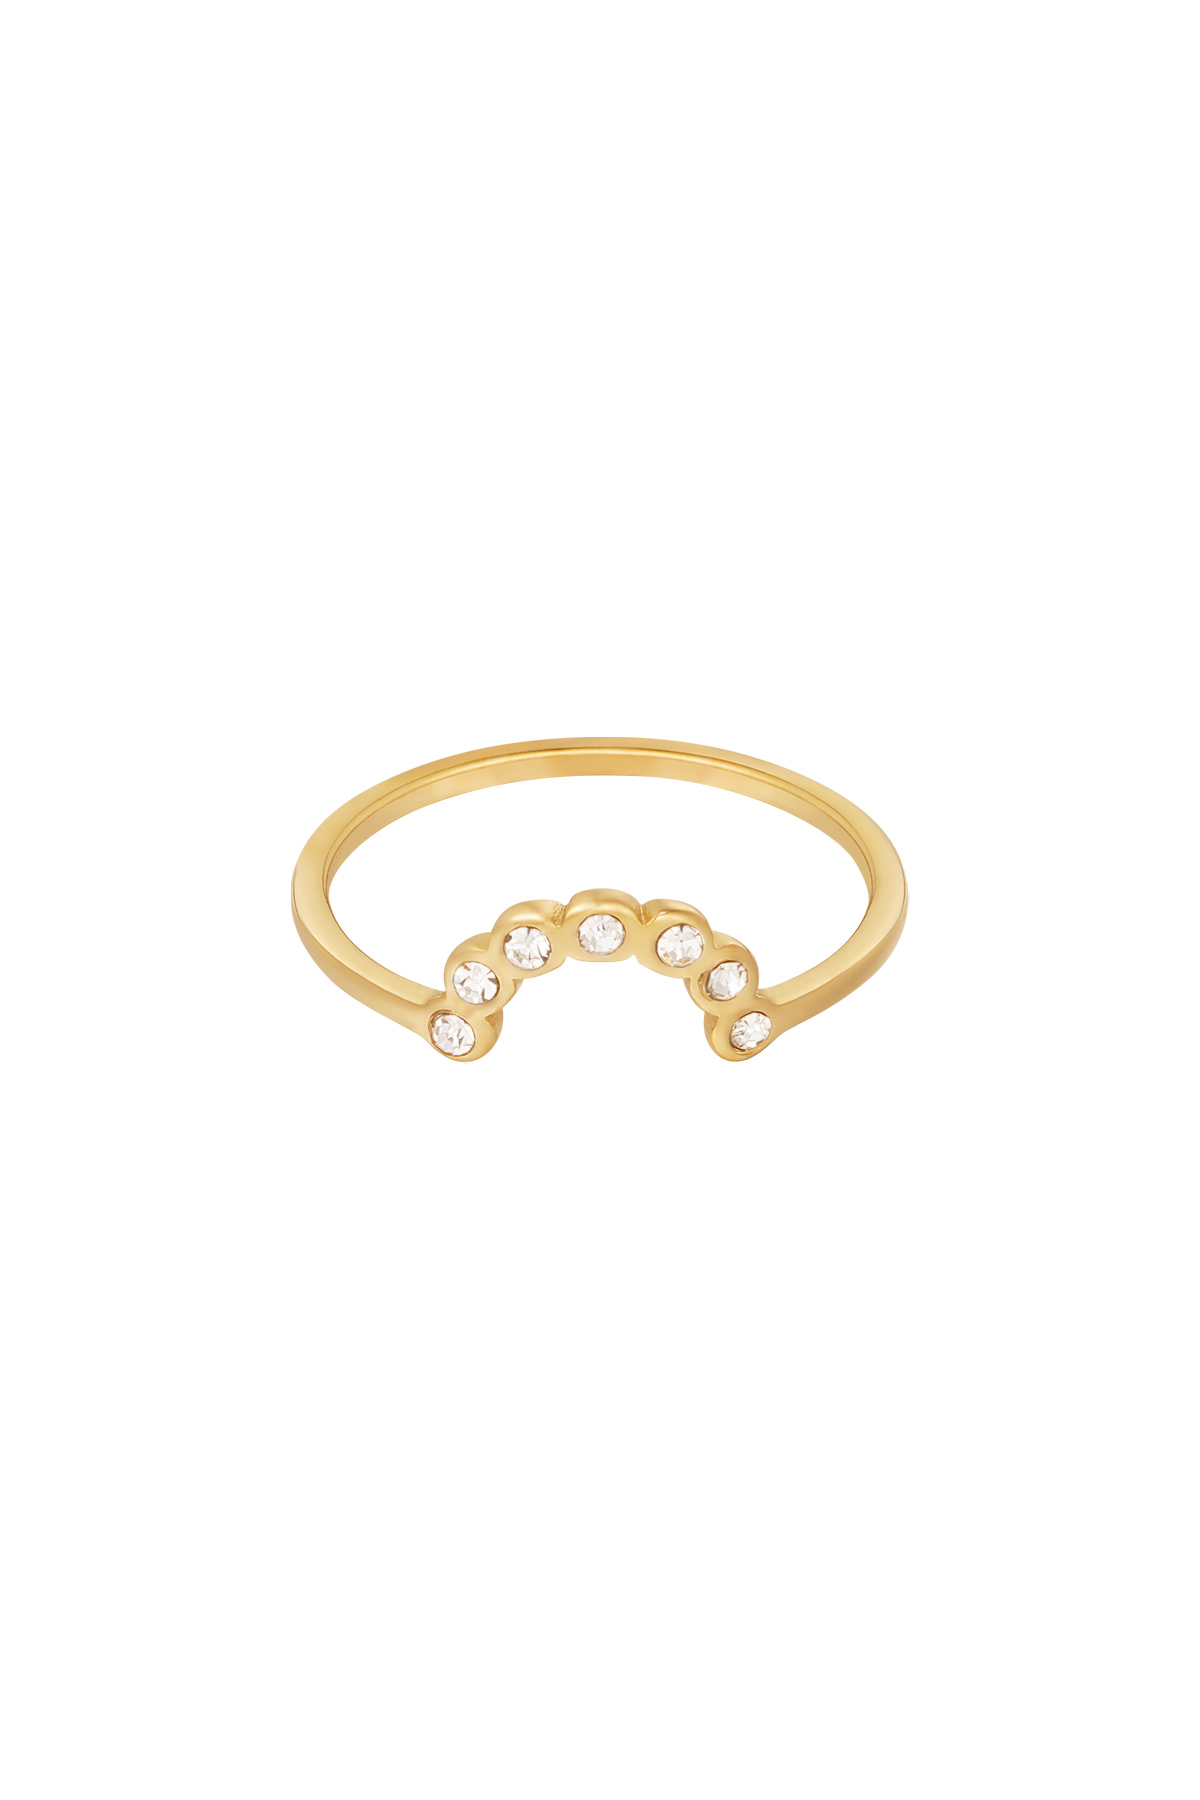 Ring moon with stones - gold h5 